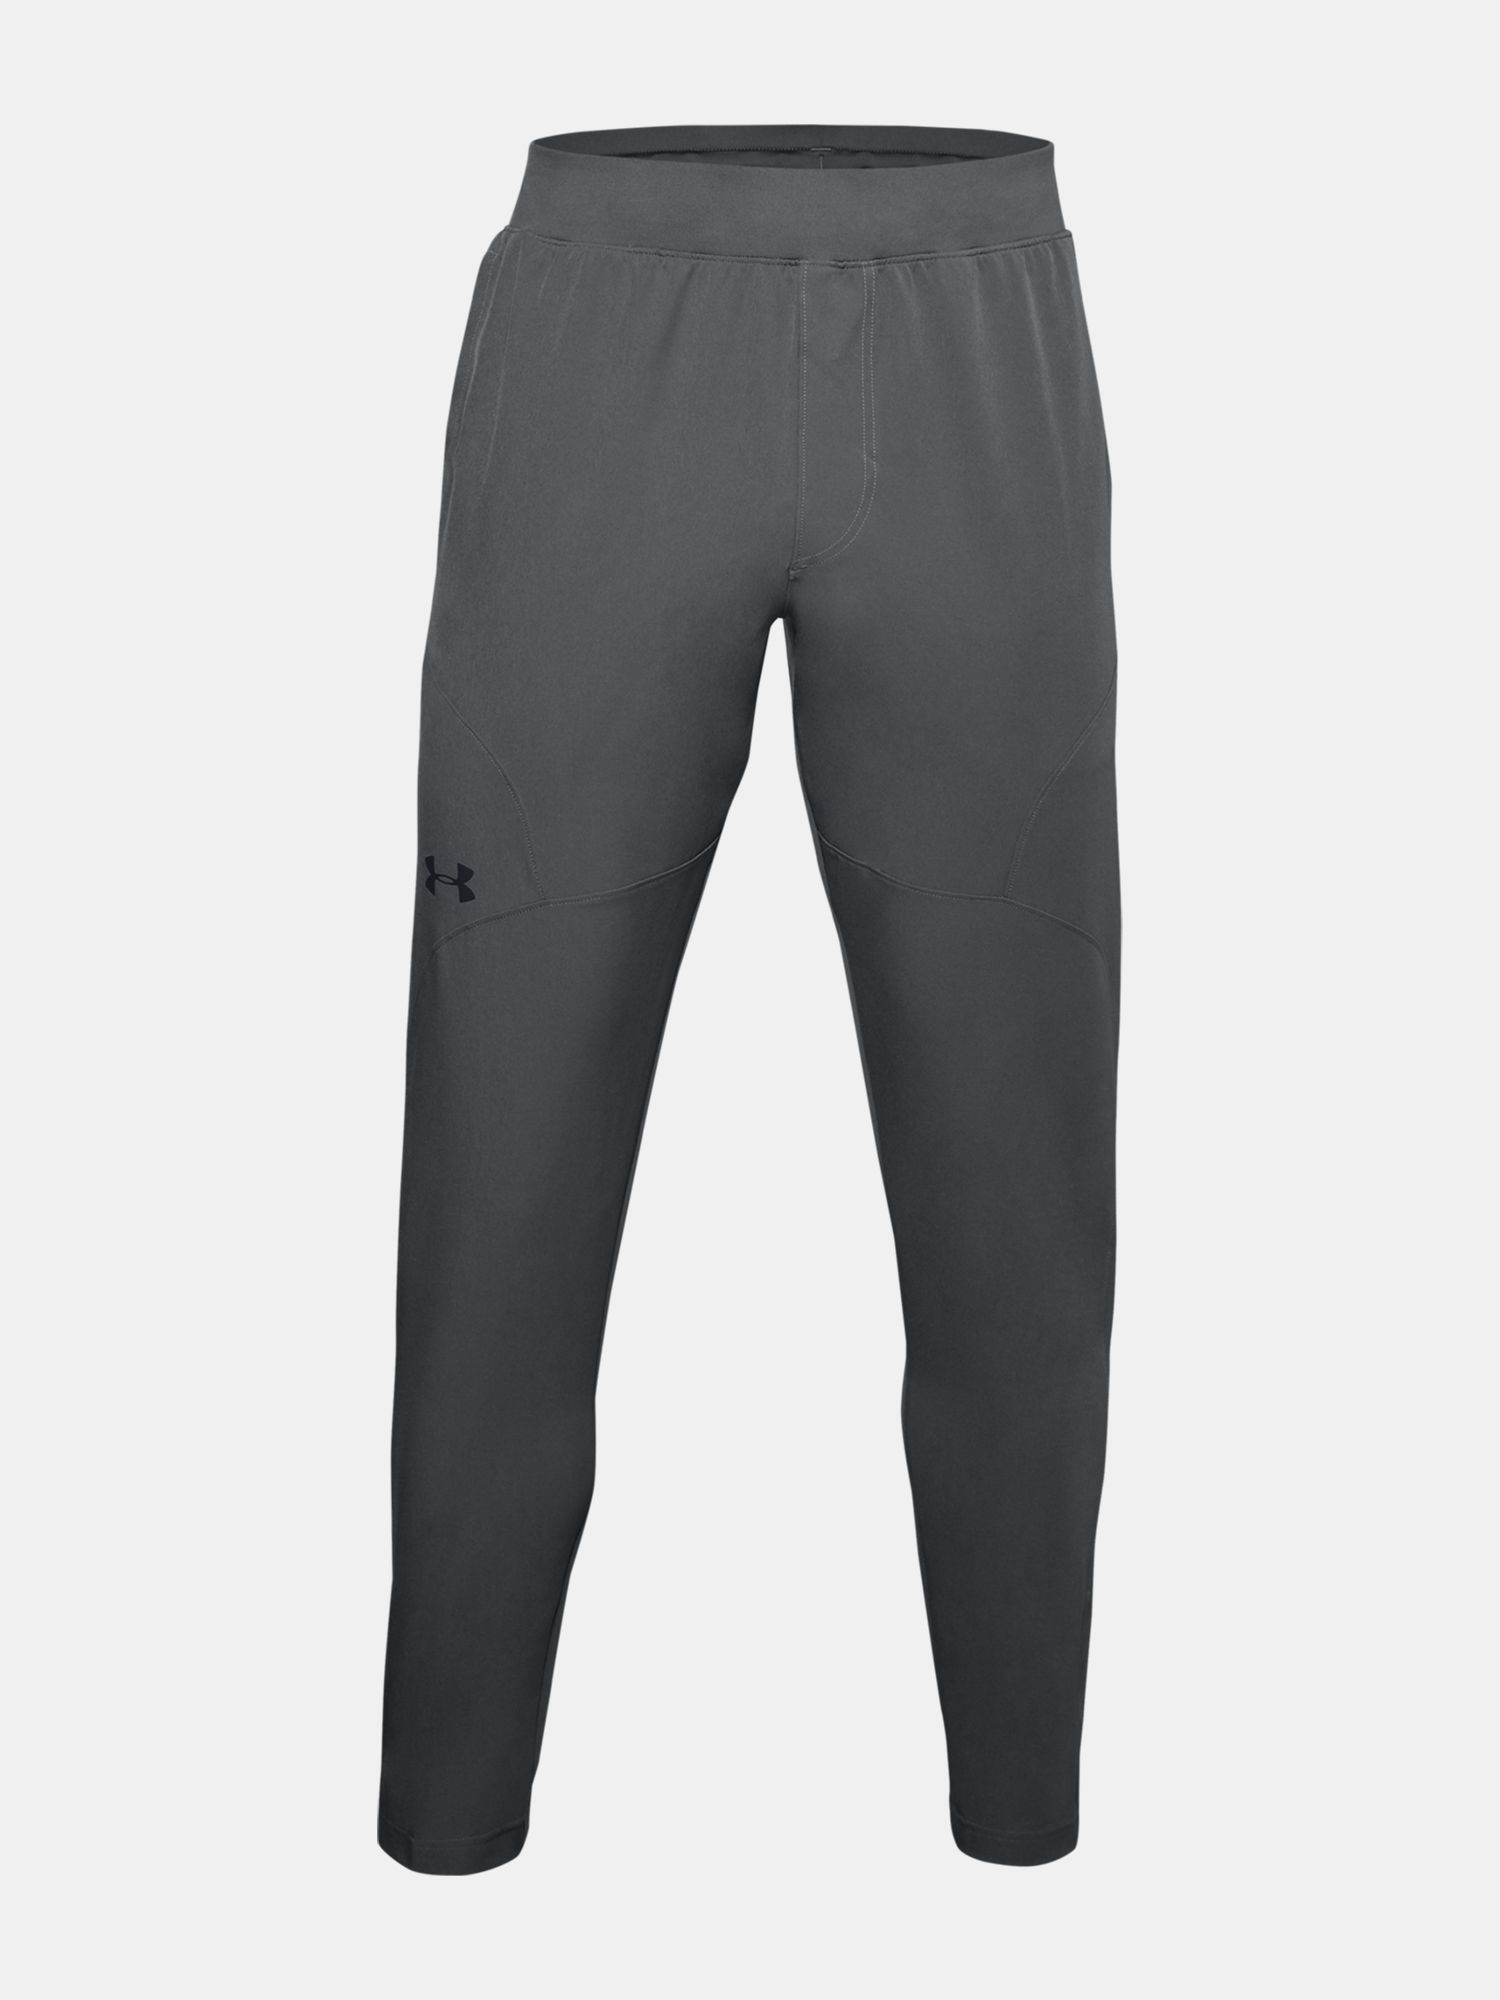 Tepláky Under Armour UNSTOPPABLE TAPERED PANTS-GRY (1)